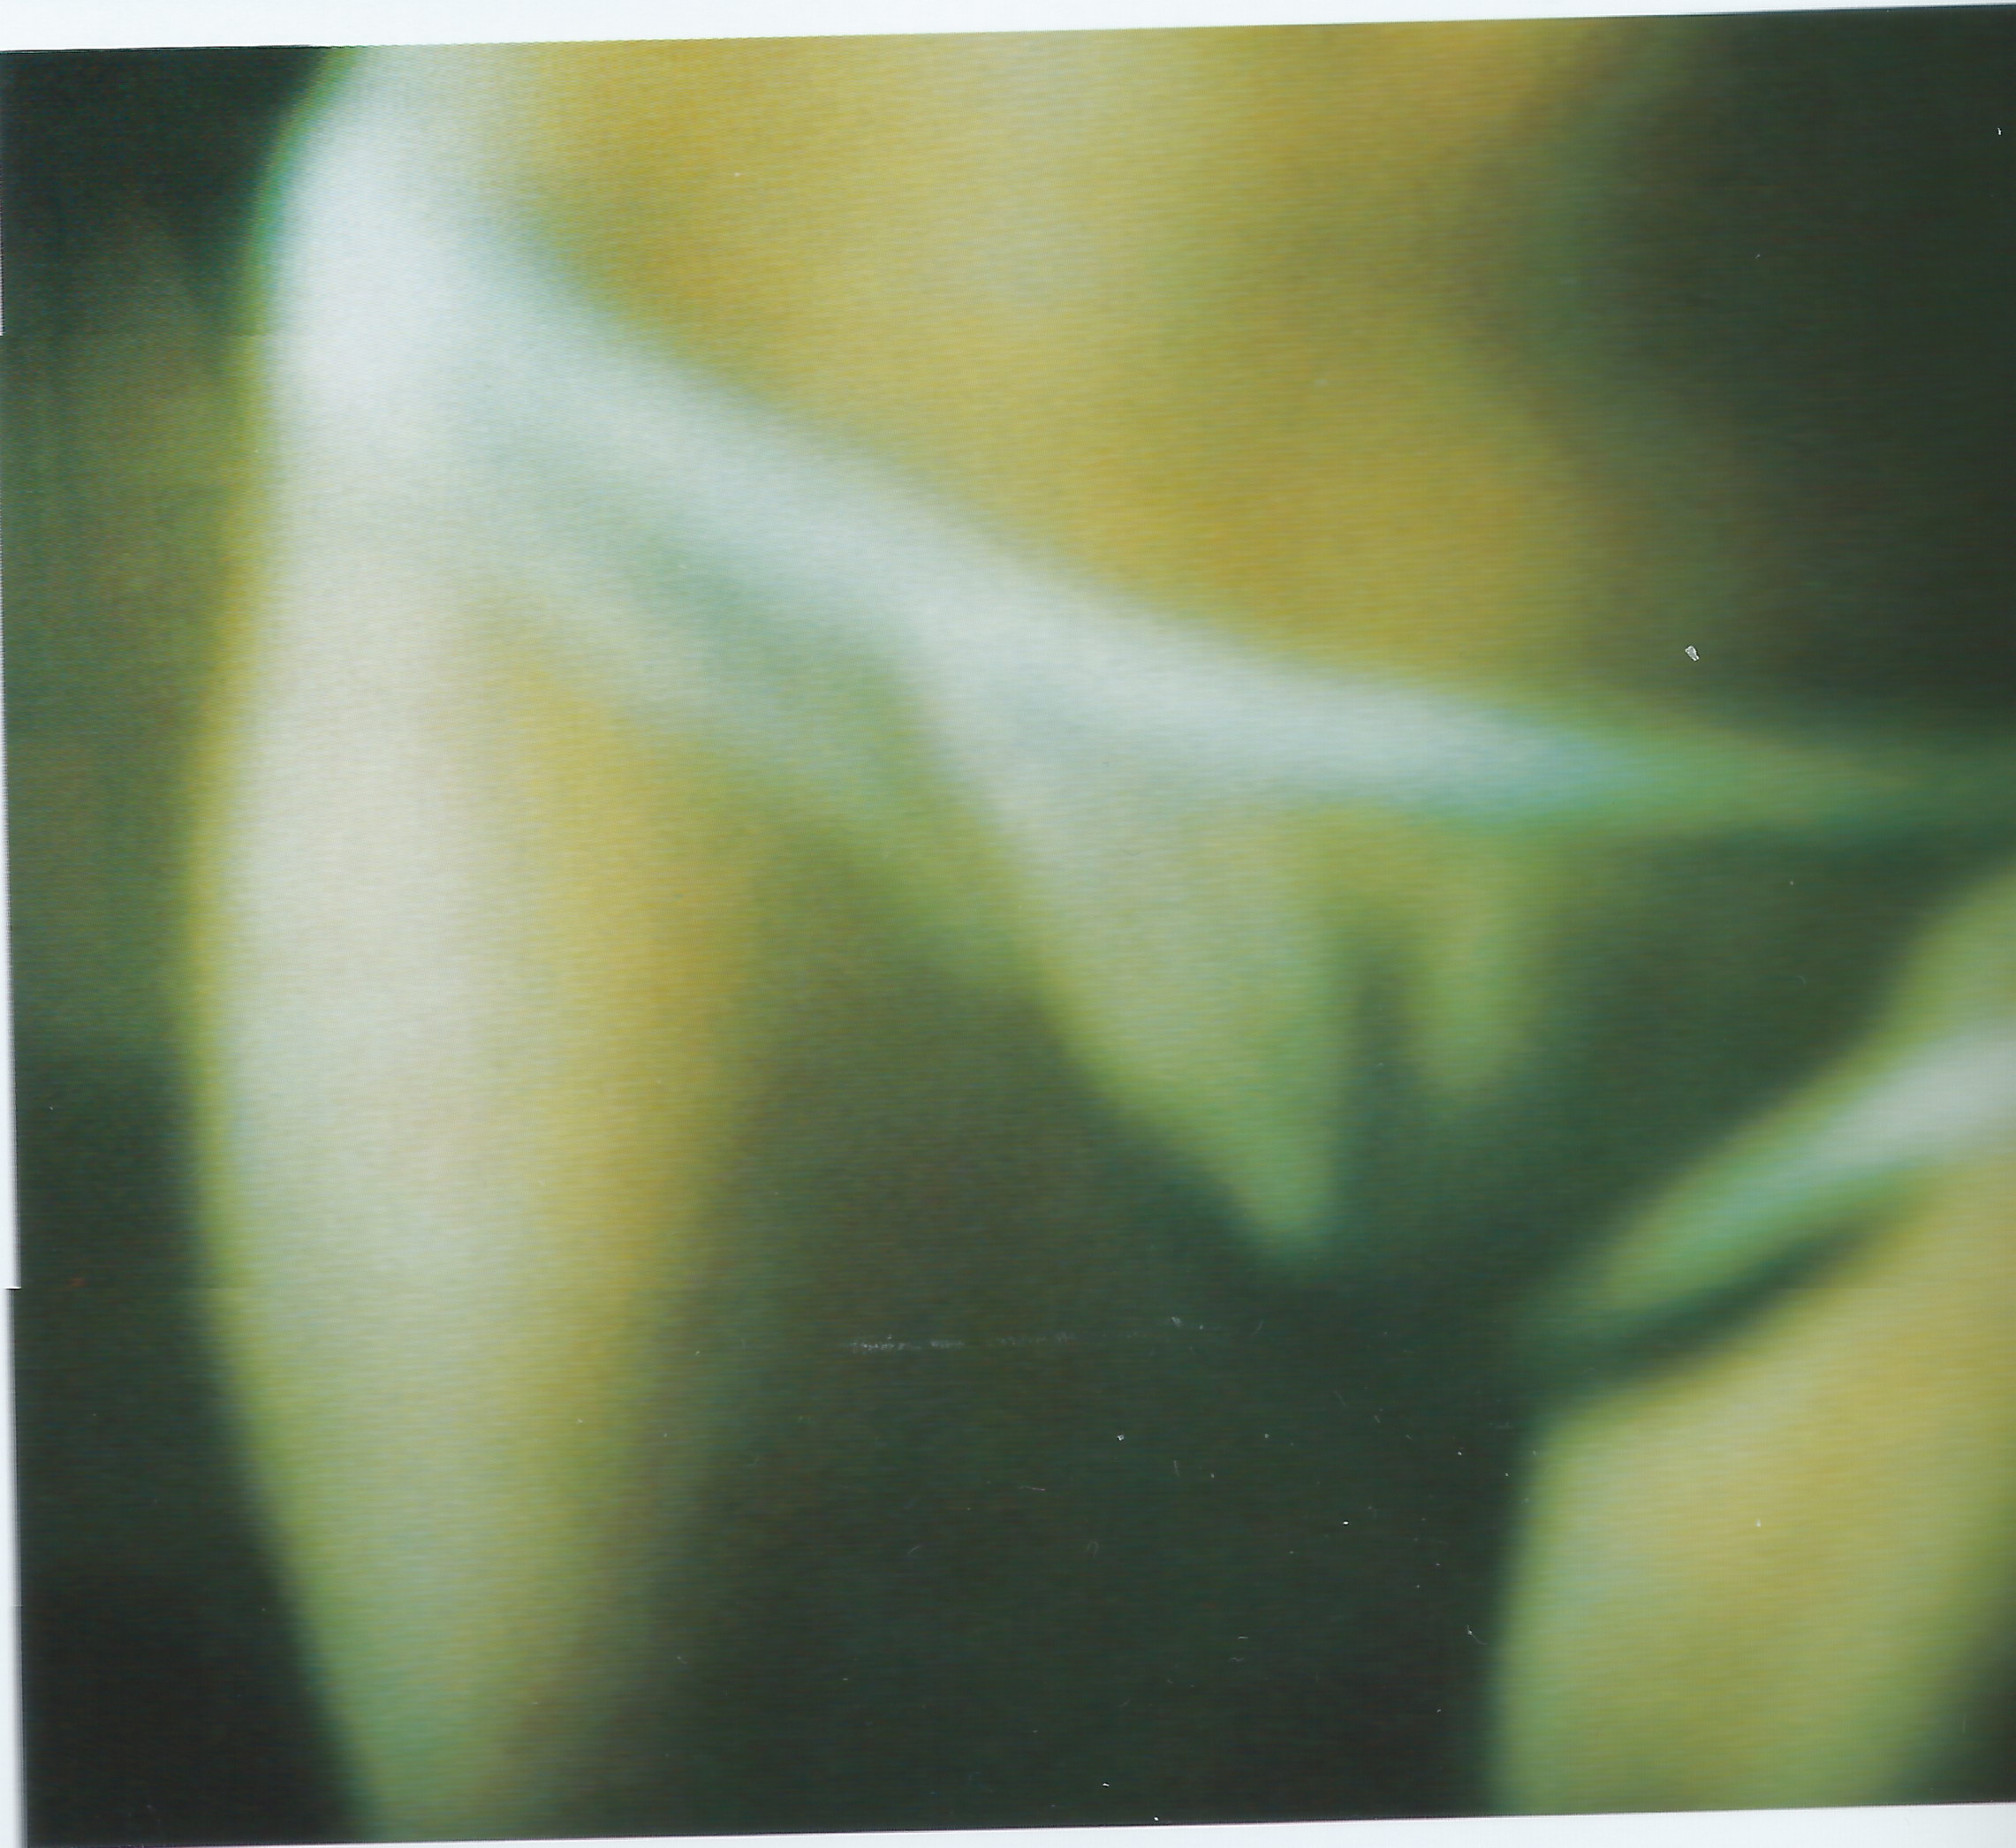 Kylie_Minogue_fully_nude_from_her_1999_book_Kylie_9x_UHQ_11.JPG